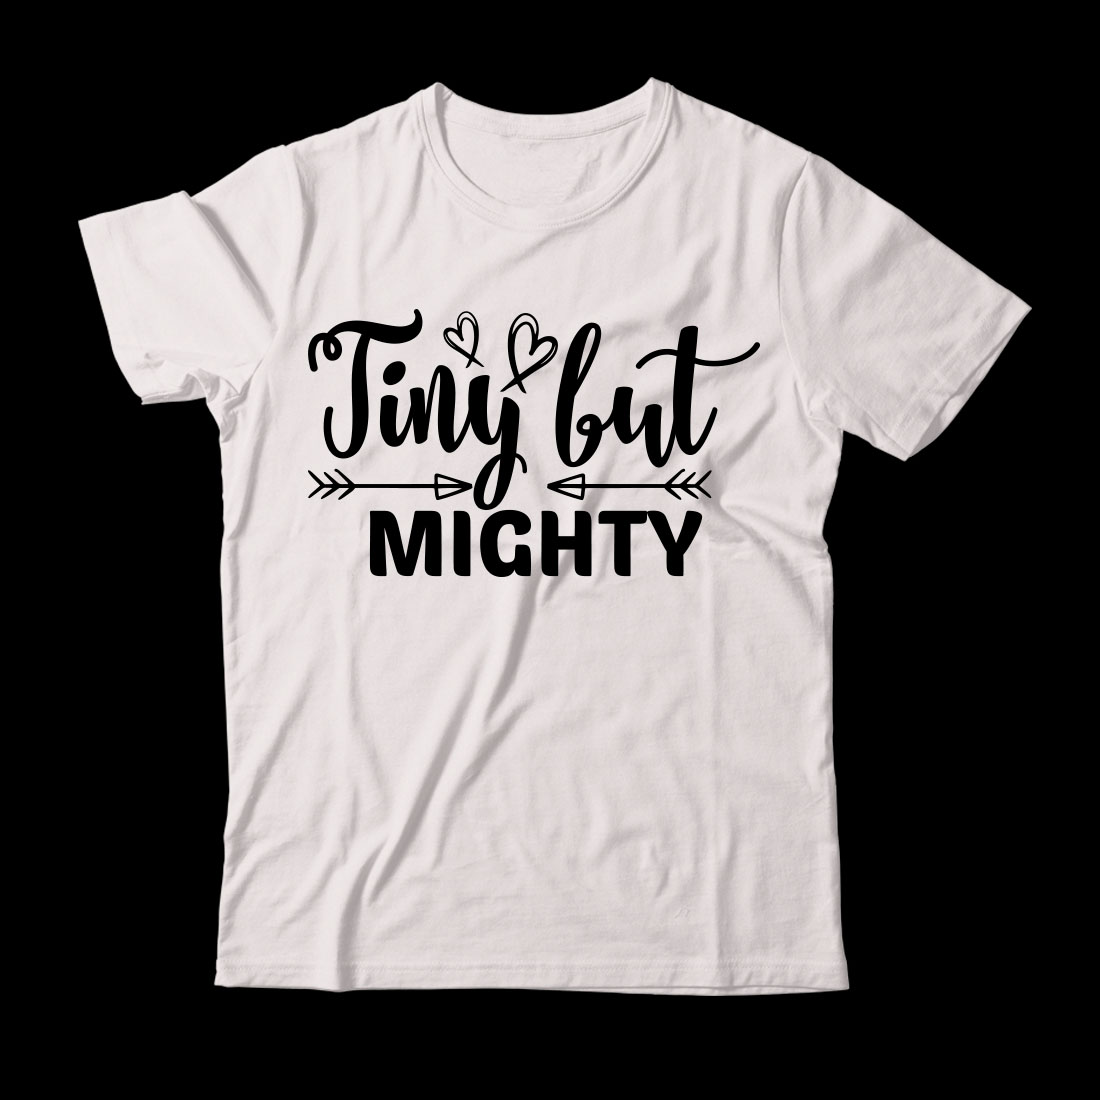 White t - shirt that says tiny but mighty.